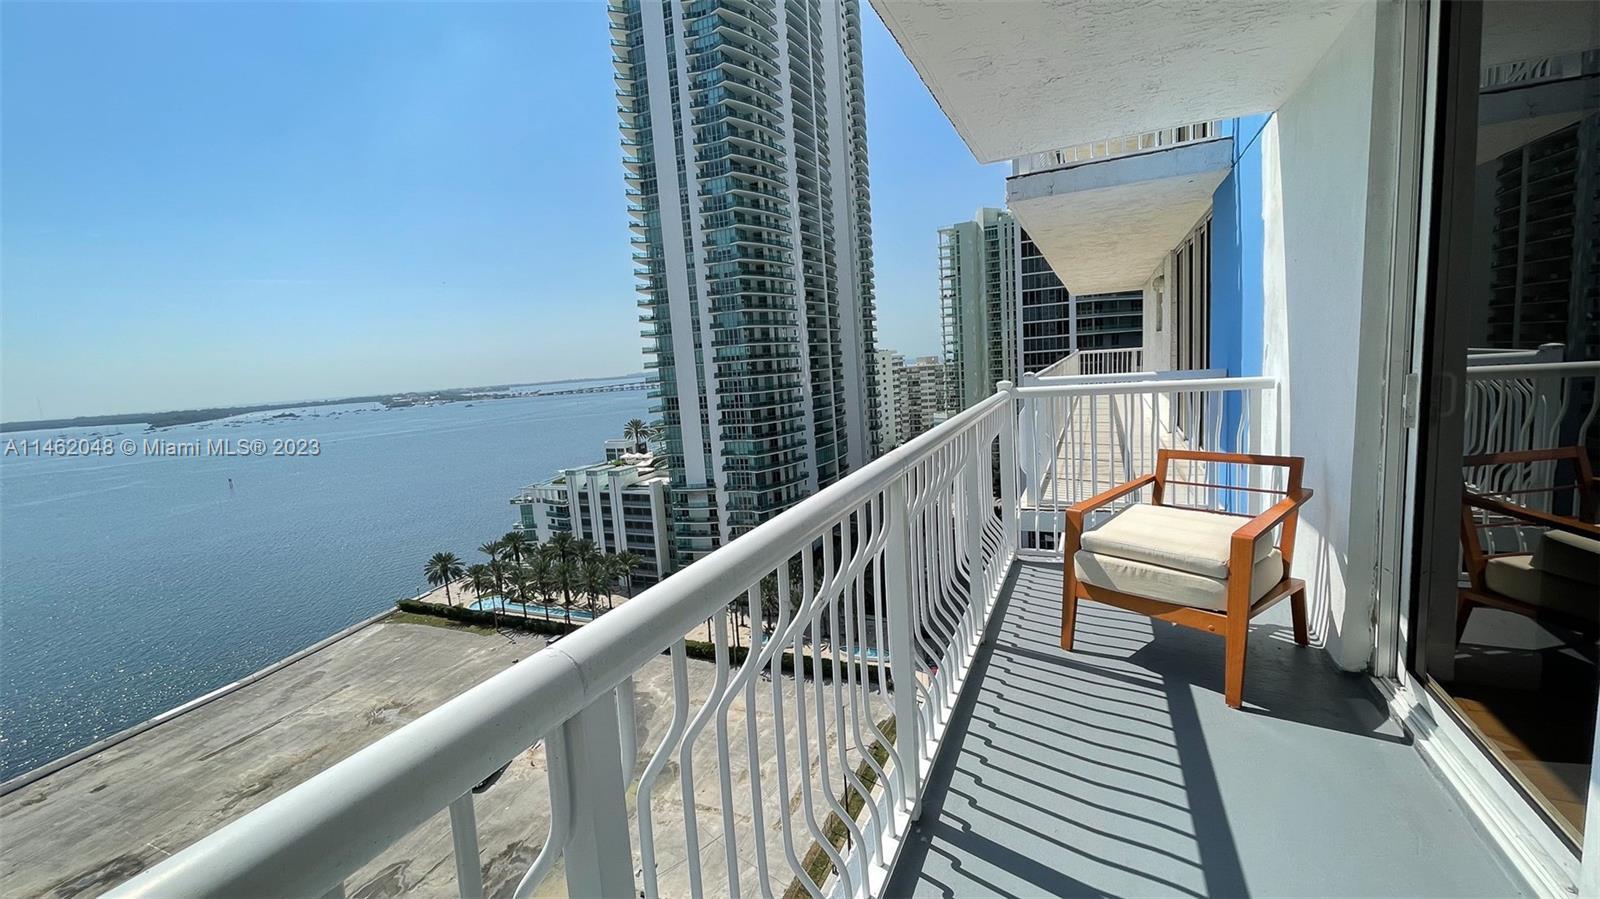 Super spacious move-in condition 3 bed/2 bath in the heart of Brickell. No rental restrictions. Perf